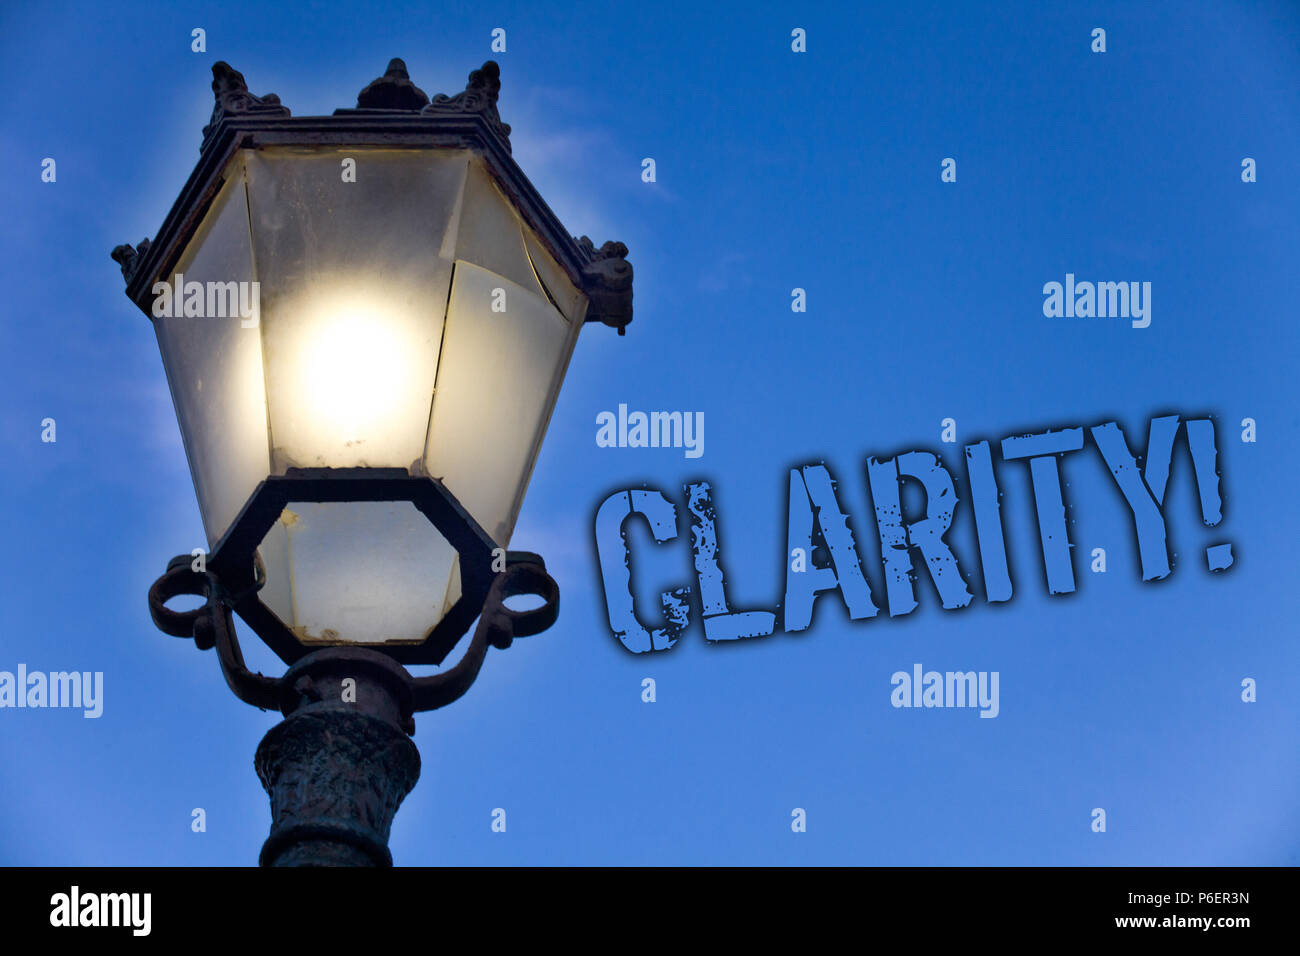 Text sign showing Clarity. Conceptual photo Certainty Precision Purity Comprehensibility Transparency Accuracy Light post blue sky enlighten ideas mes Stock Photo